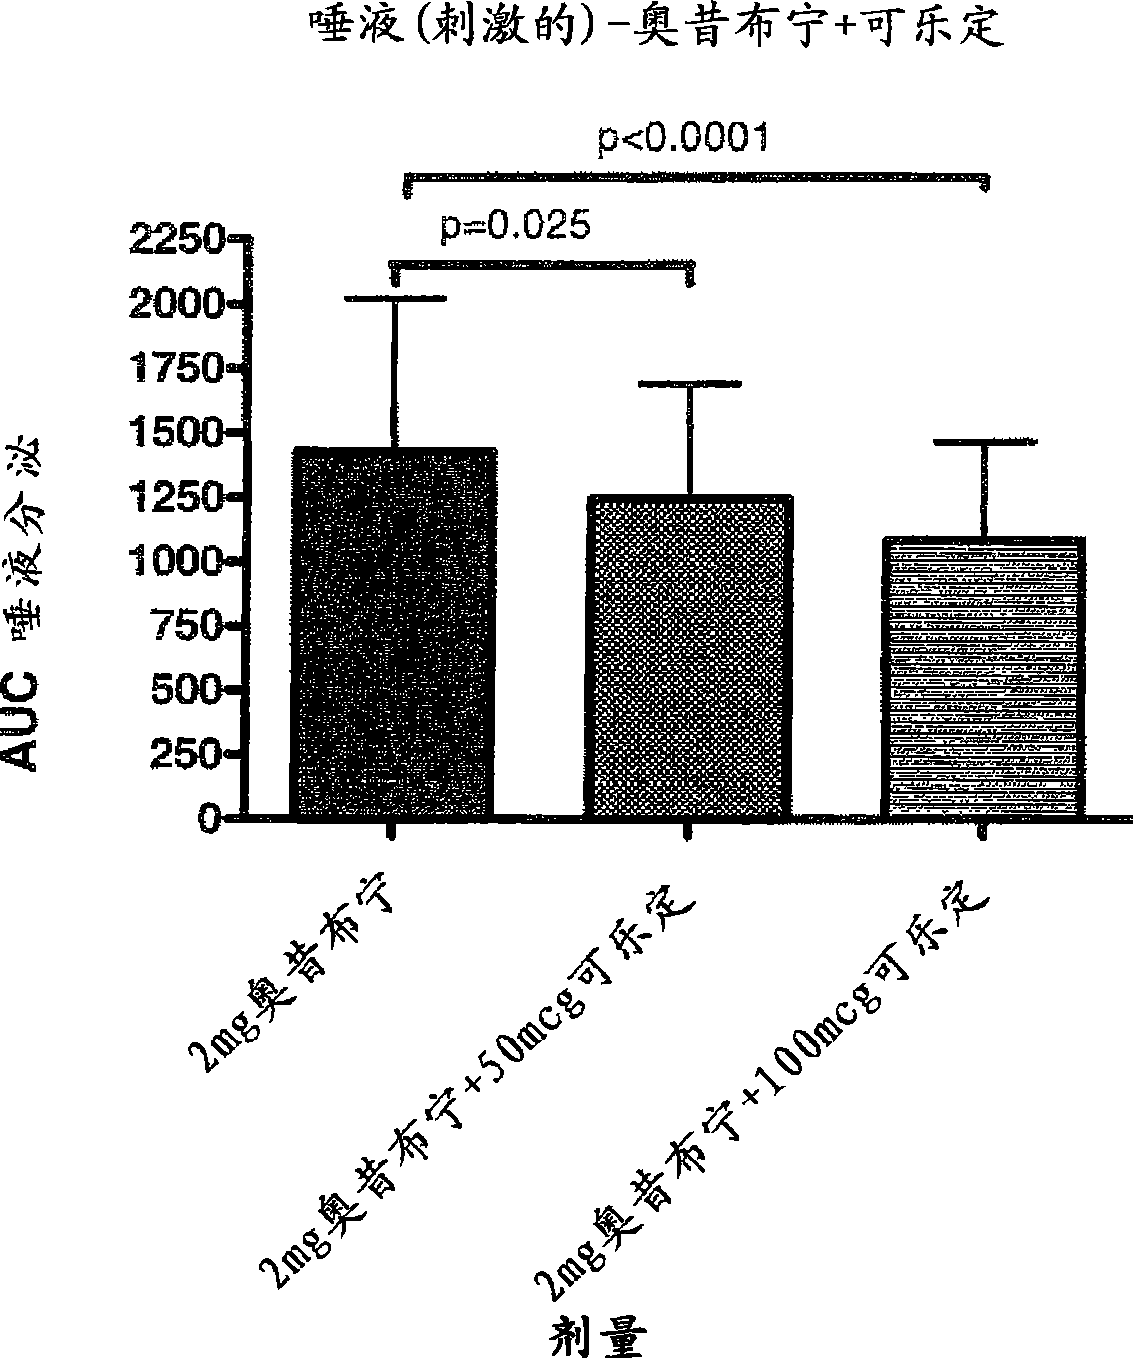 Combination of alpha-2 receptor agonist (clonidin) and an anti-muscarinic agent (oxybutynin) for the treatment of sialorrhoea